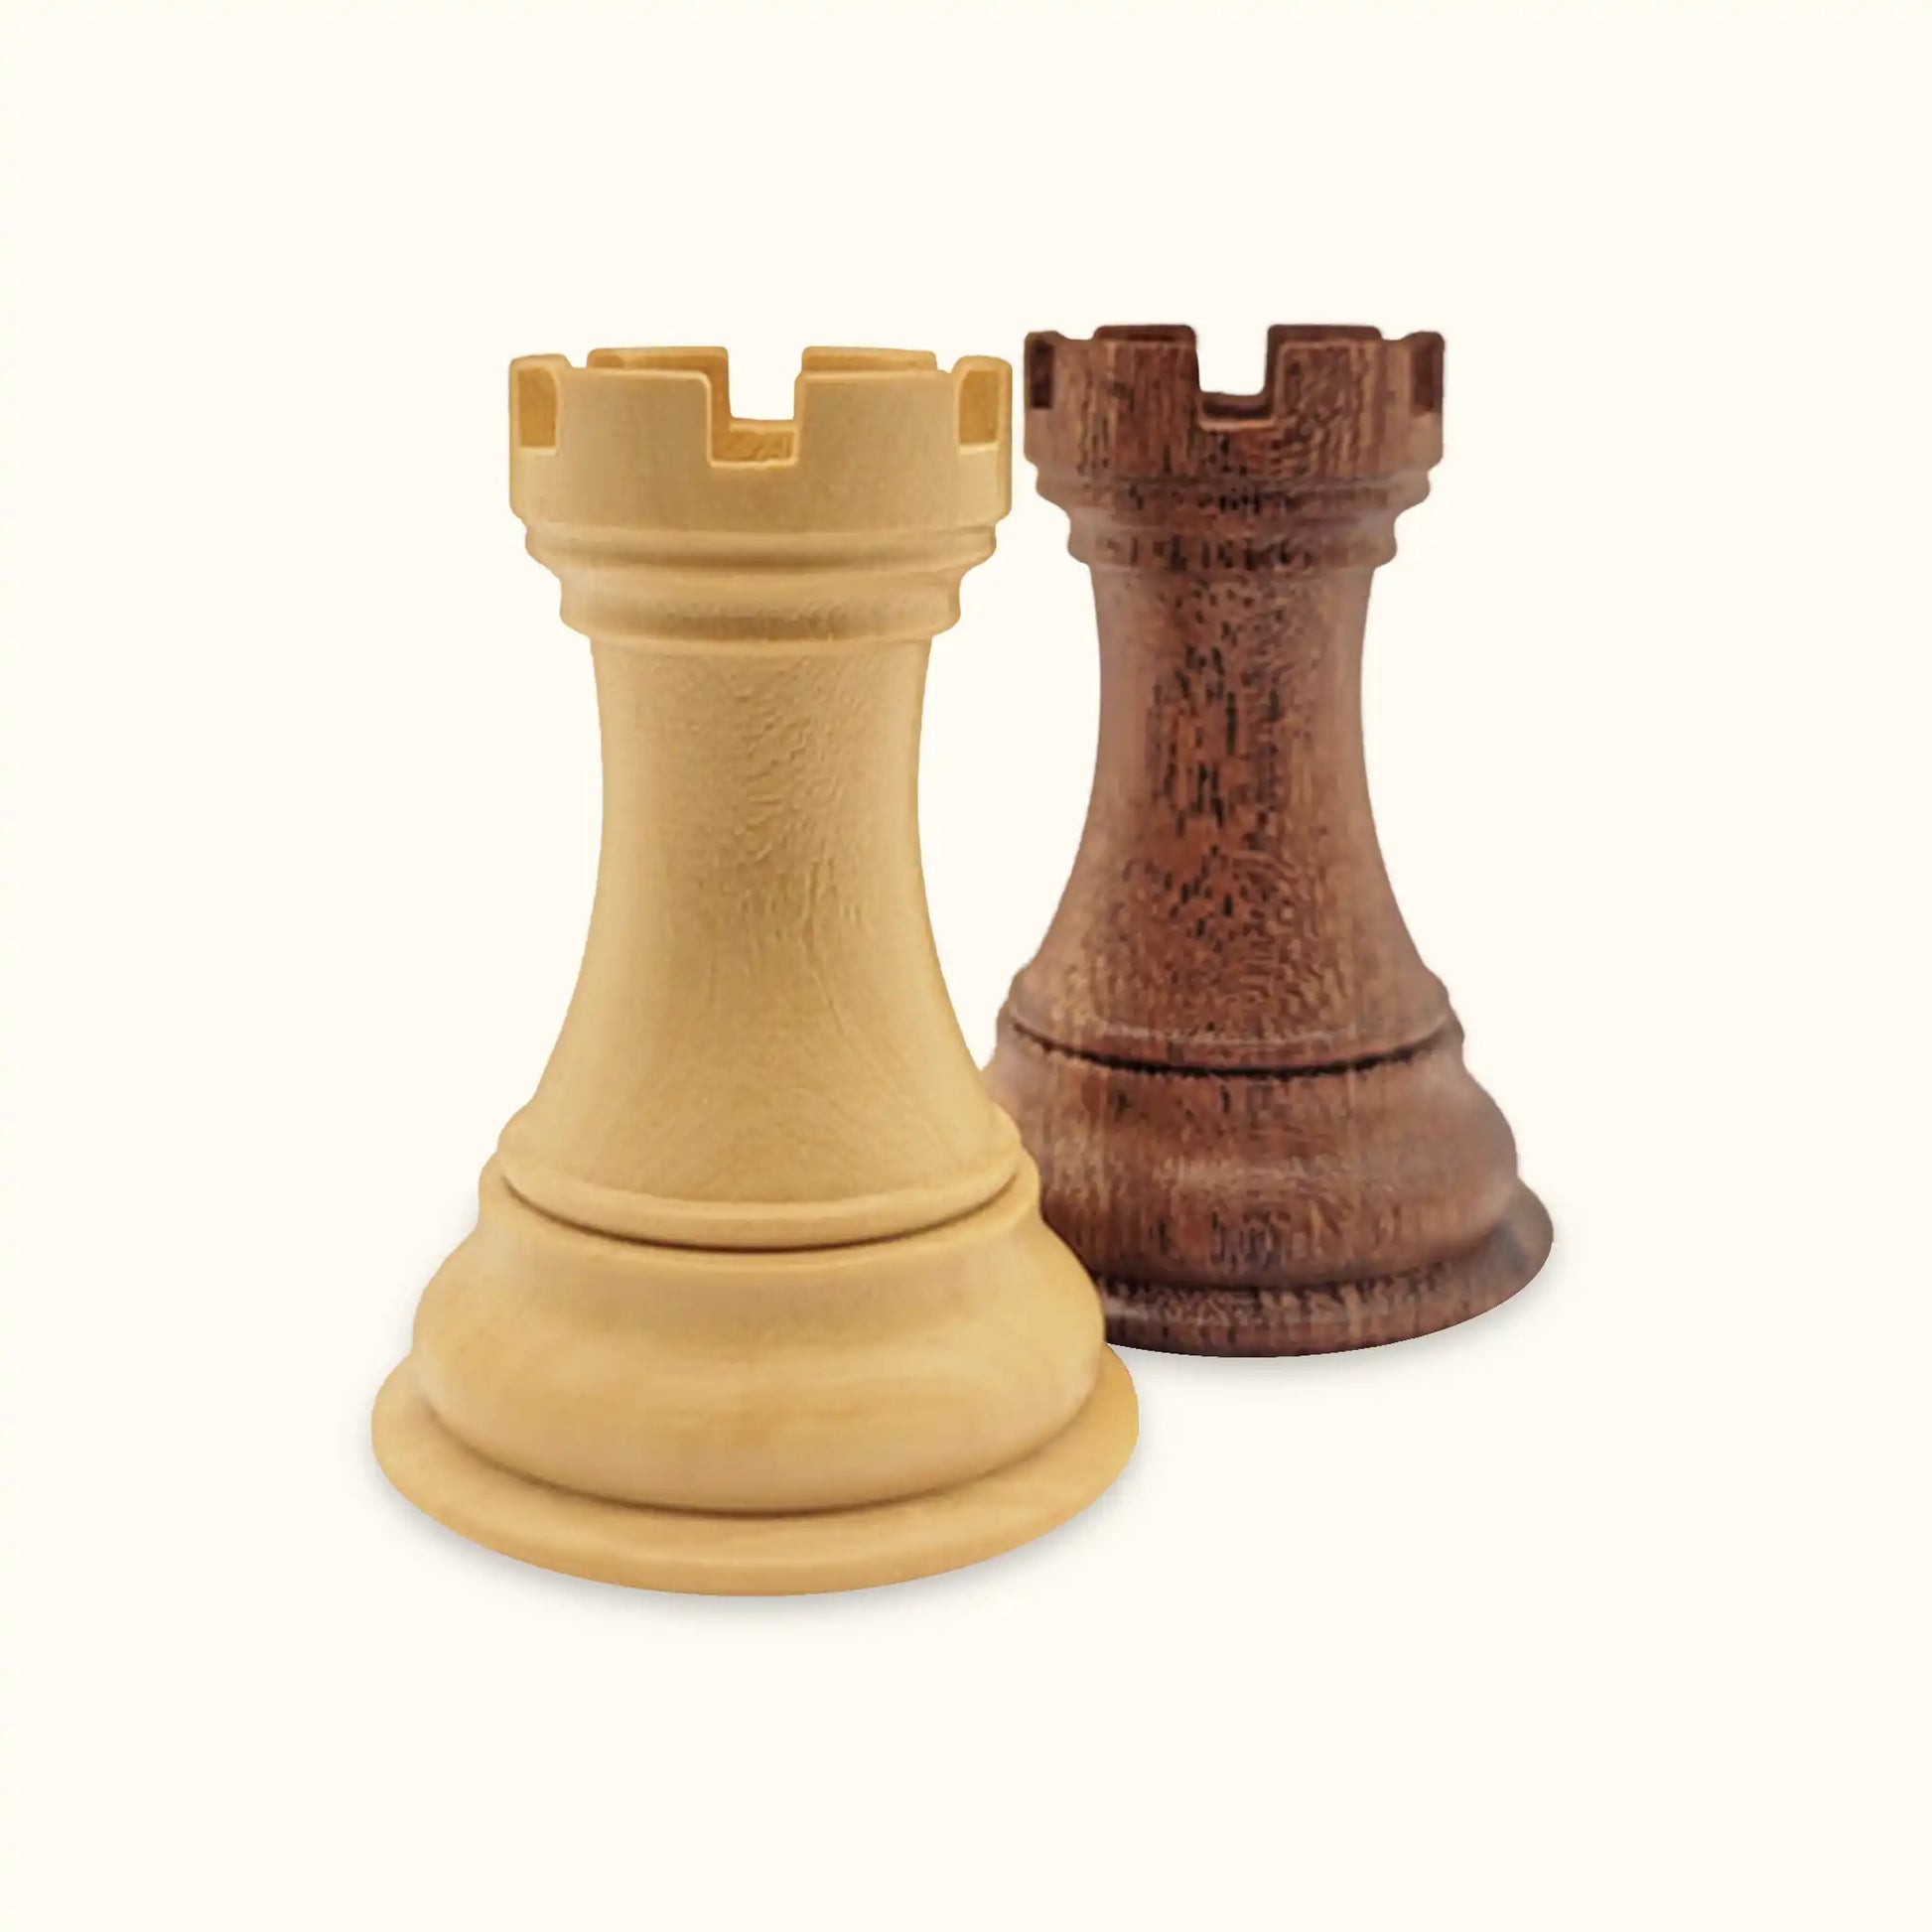  Chess Pieces for iCore Chess Set only, Queen Rook